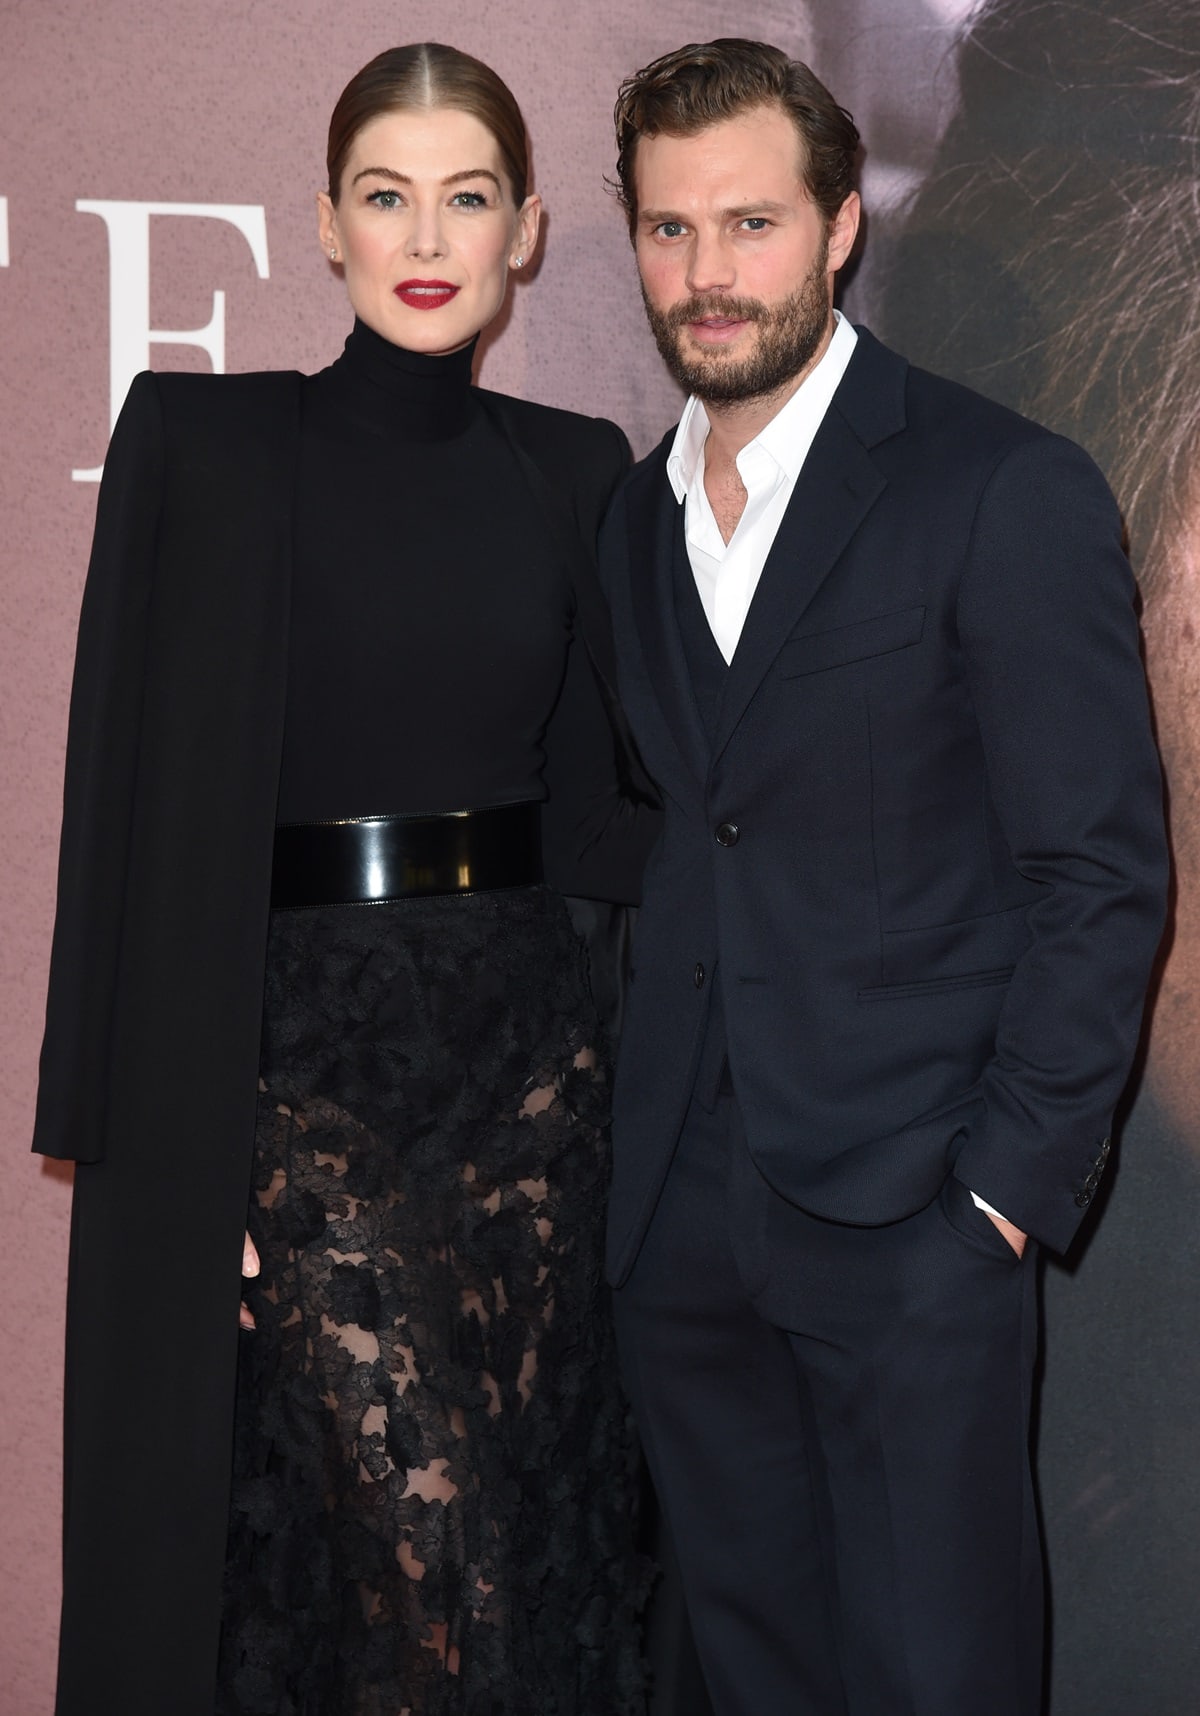 When wearing heels, Rosamund Pike, who stands at 5ft 8 (172.7 cm), can appear taller than Jamie Dornan, whose height is 5ft 10 ½ (179.1 cm)